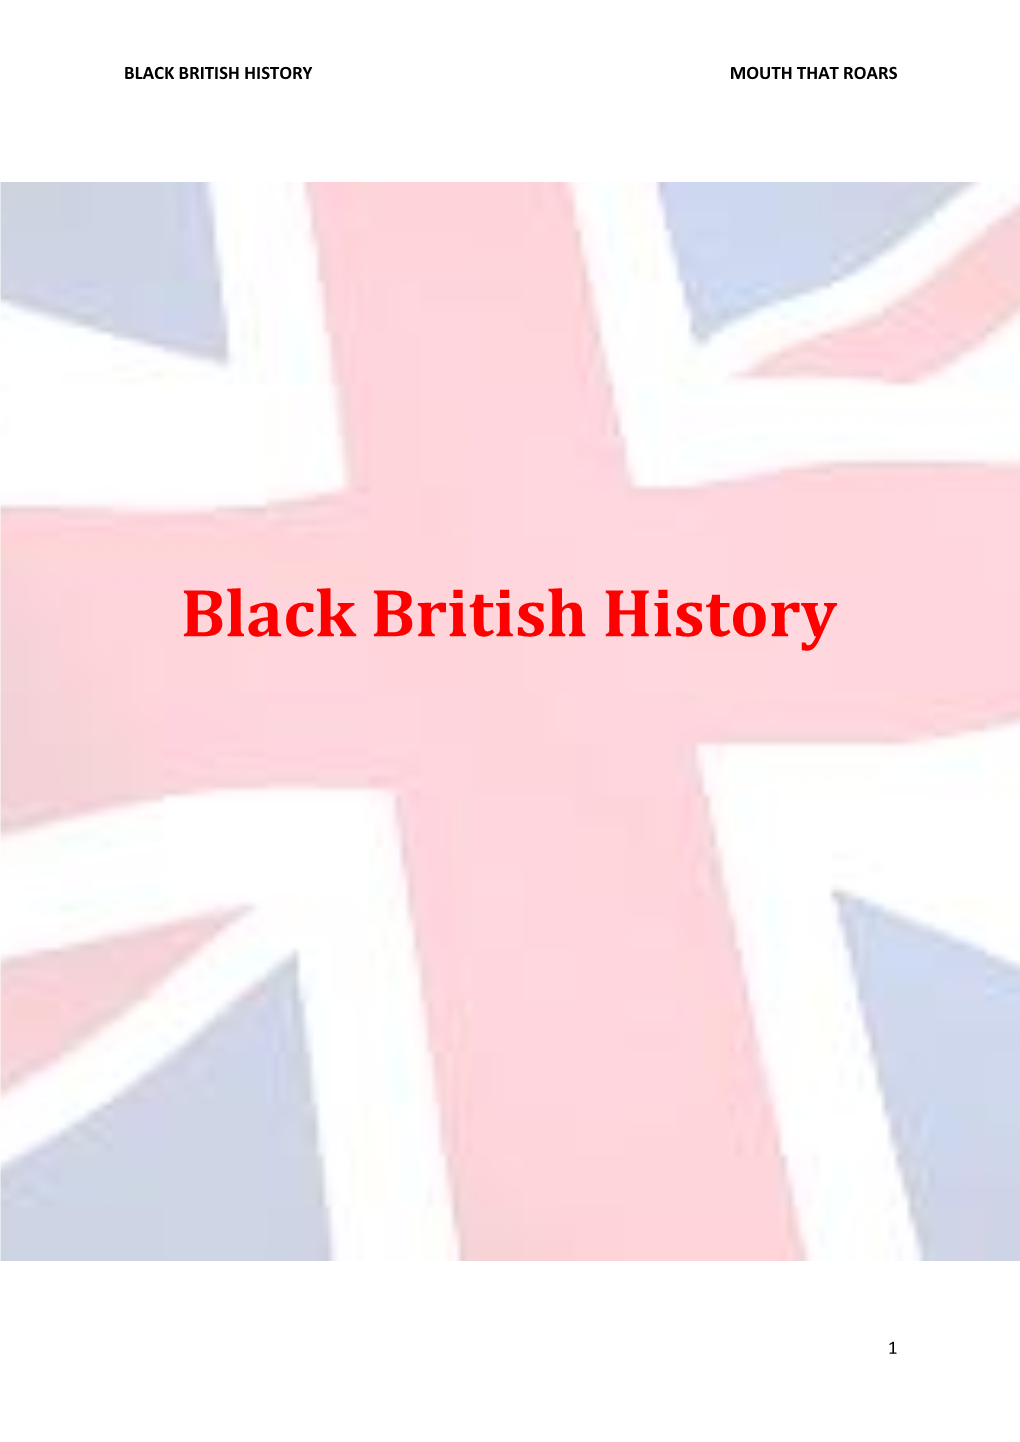 Black British History Mouth That Roars